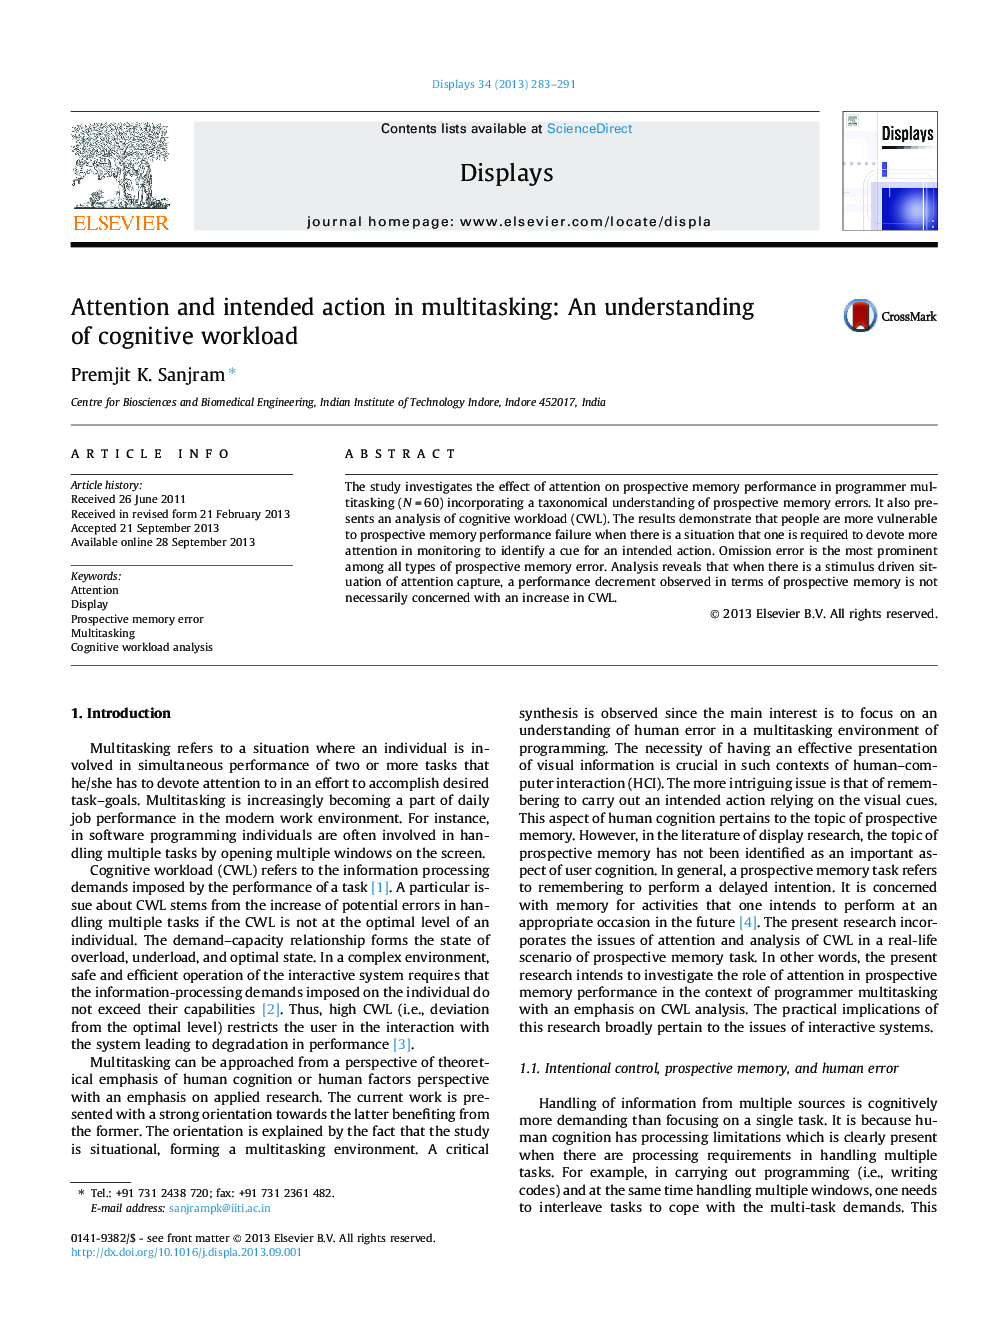 Attention and intended action in multitasking: An understanding of cognitive workload